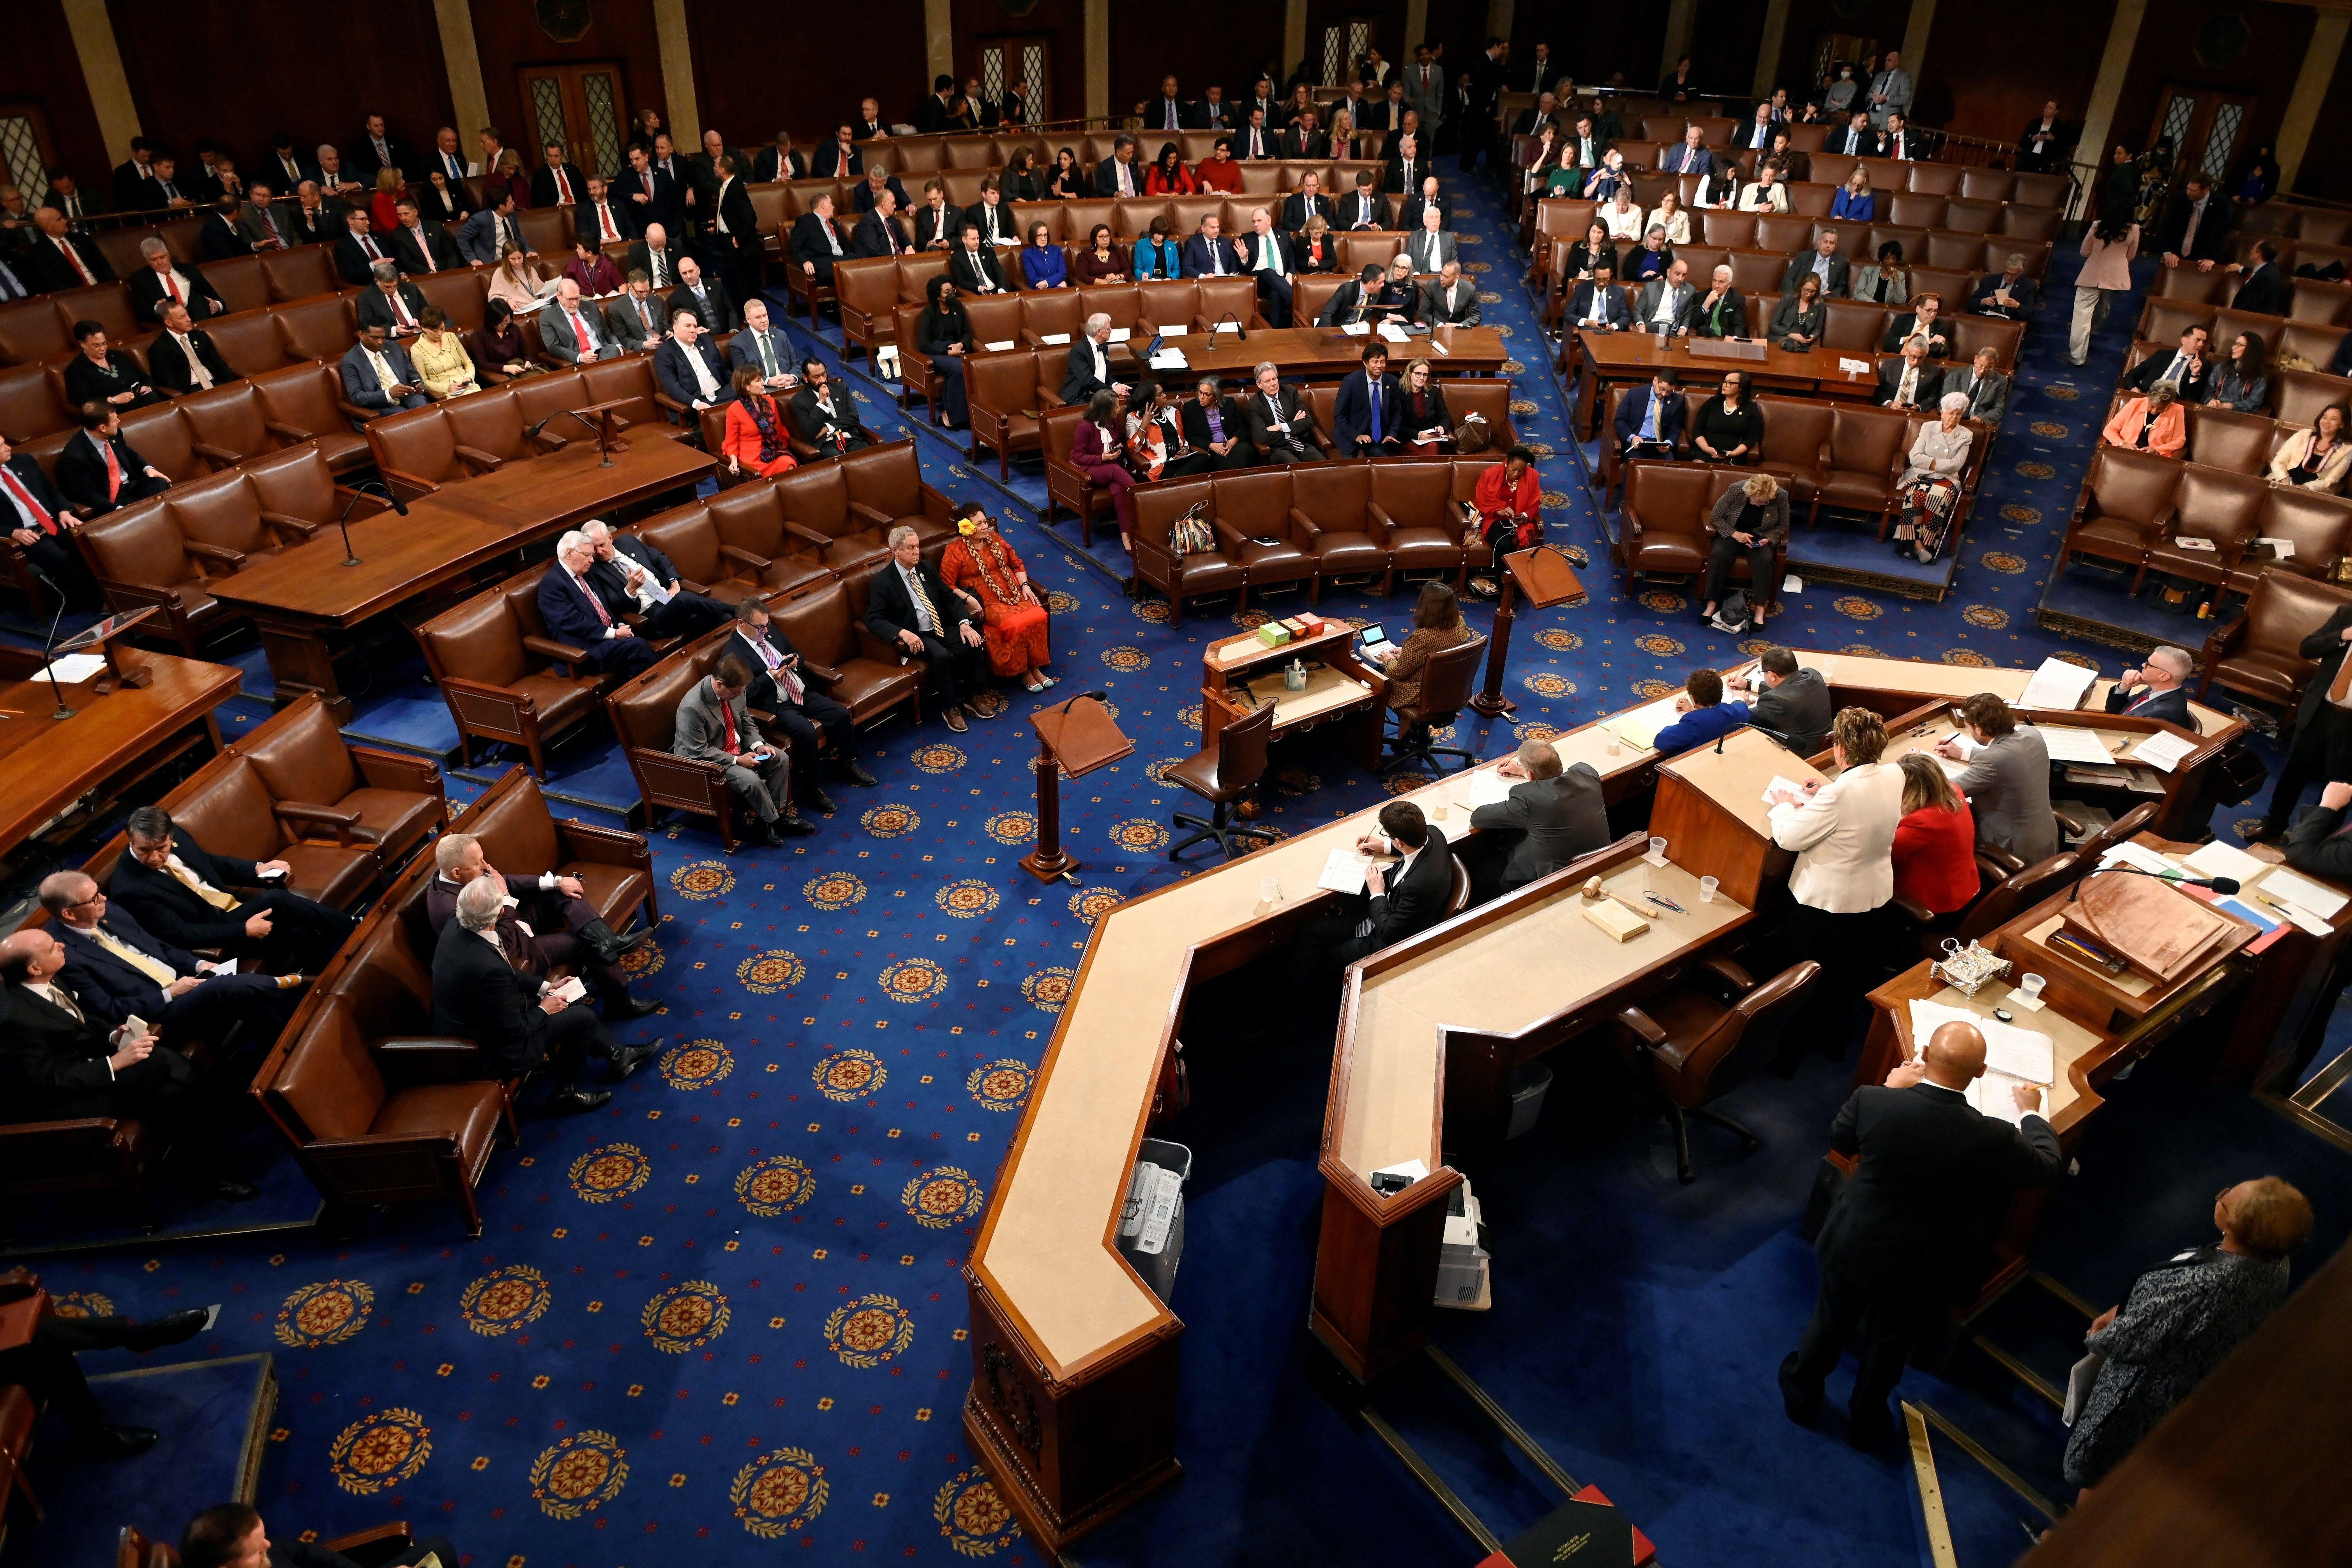 General view of the chamber of the US House of Representatives.